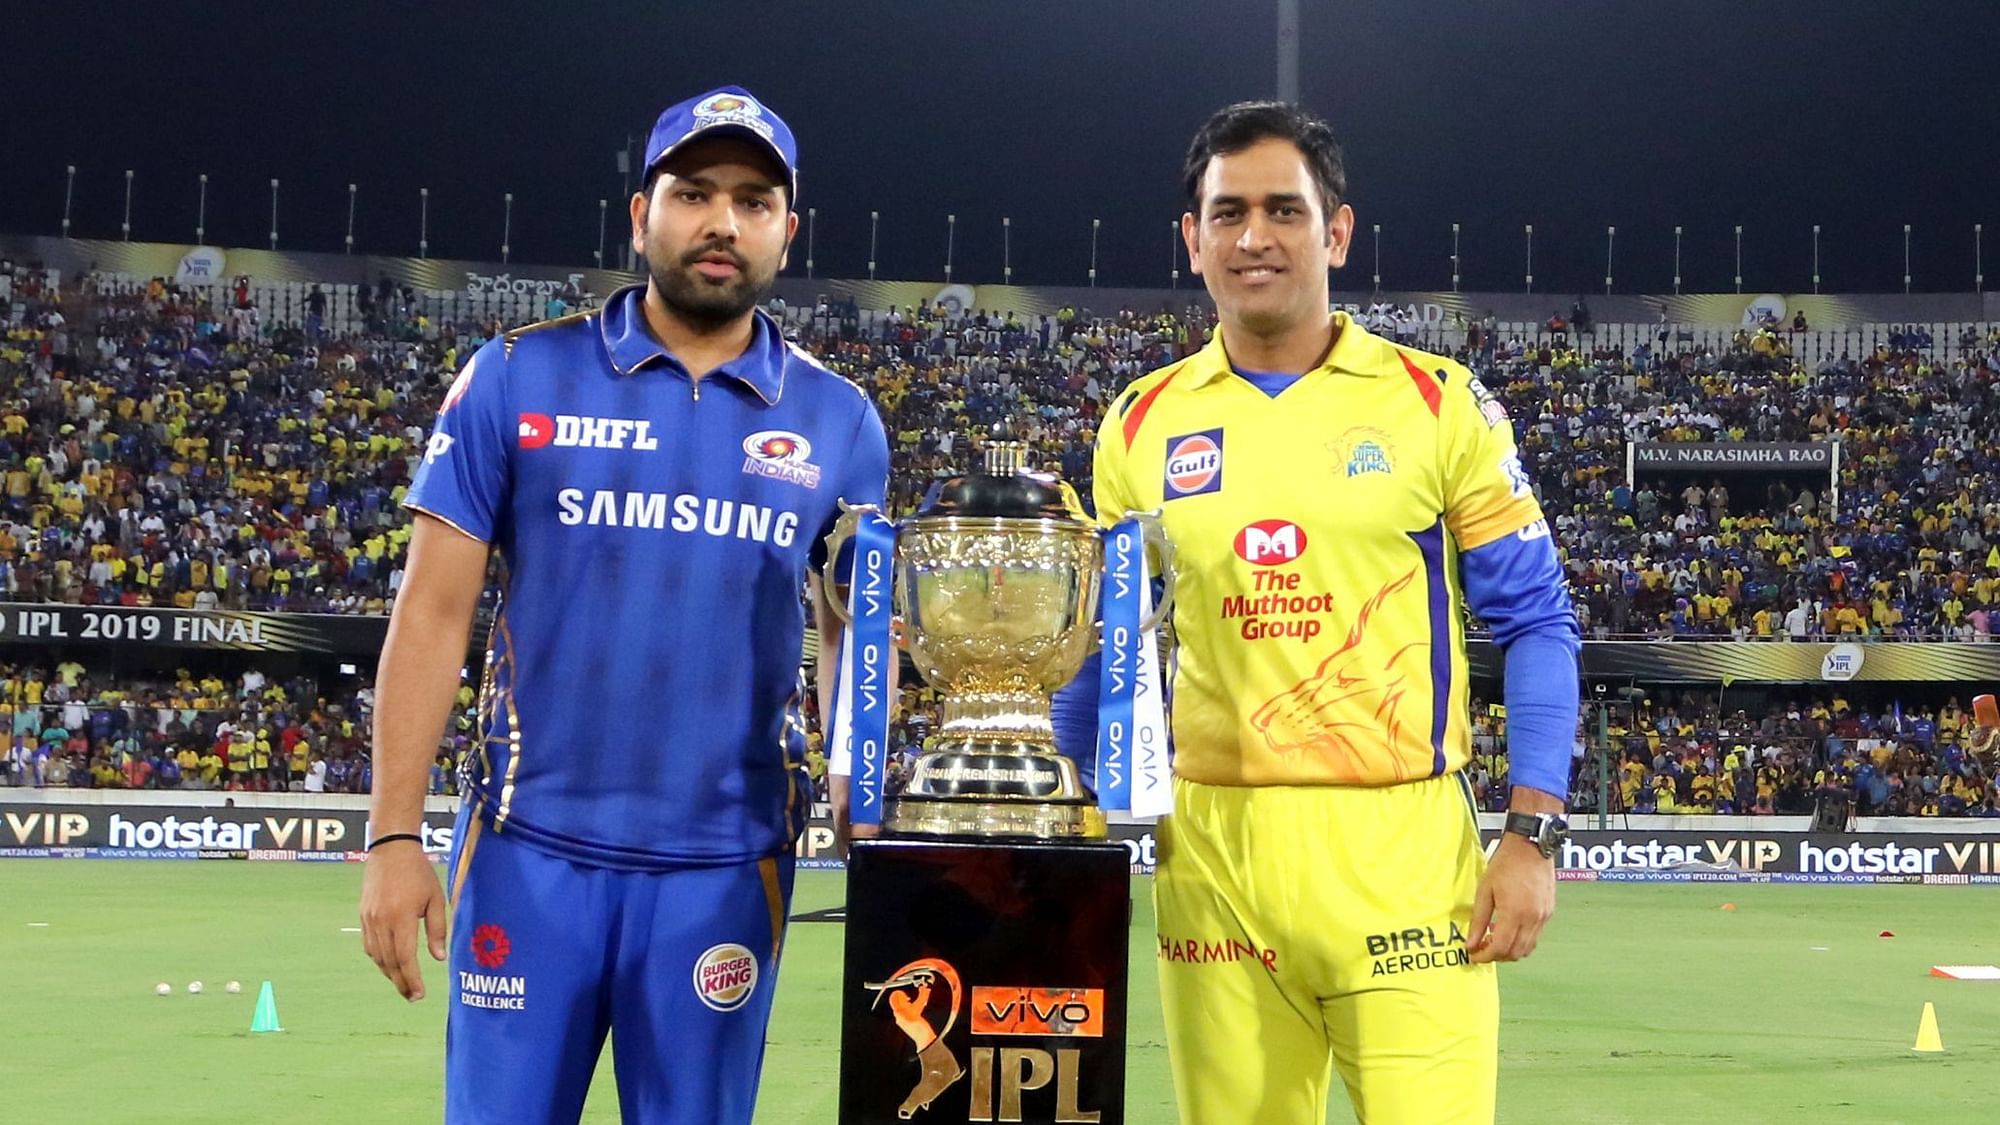 Mumbai Indians had beaten Chennai Super Kings in the final last season to win the IPL for the fourth time.